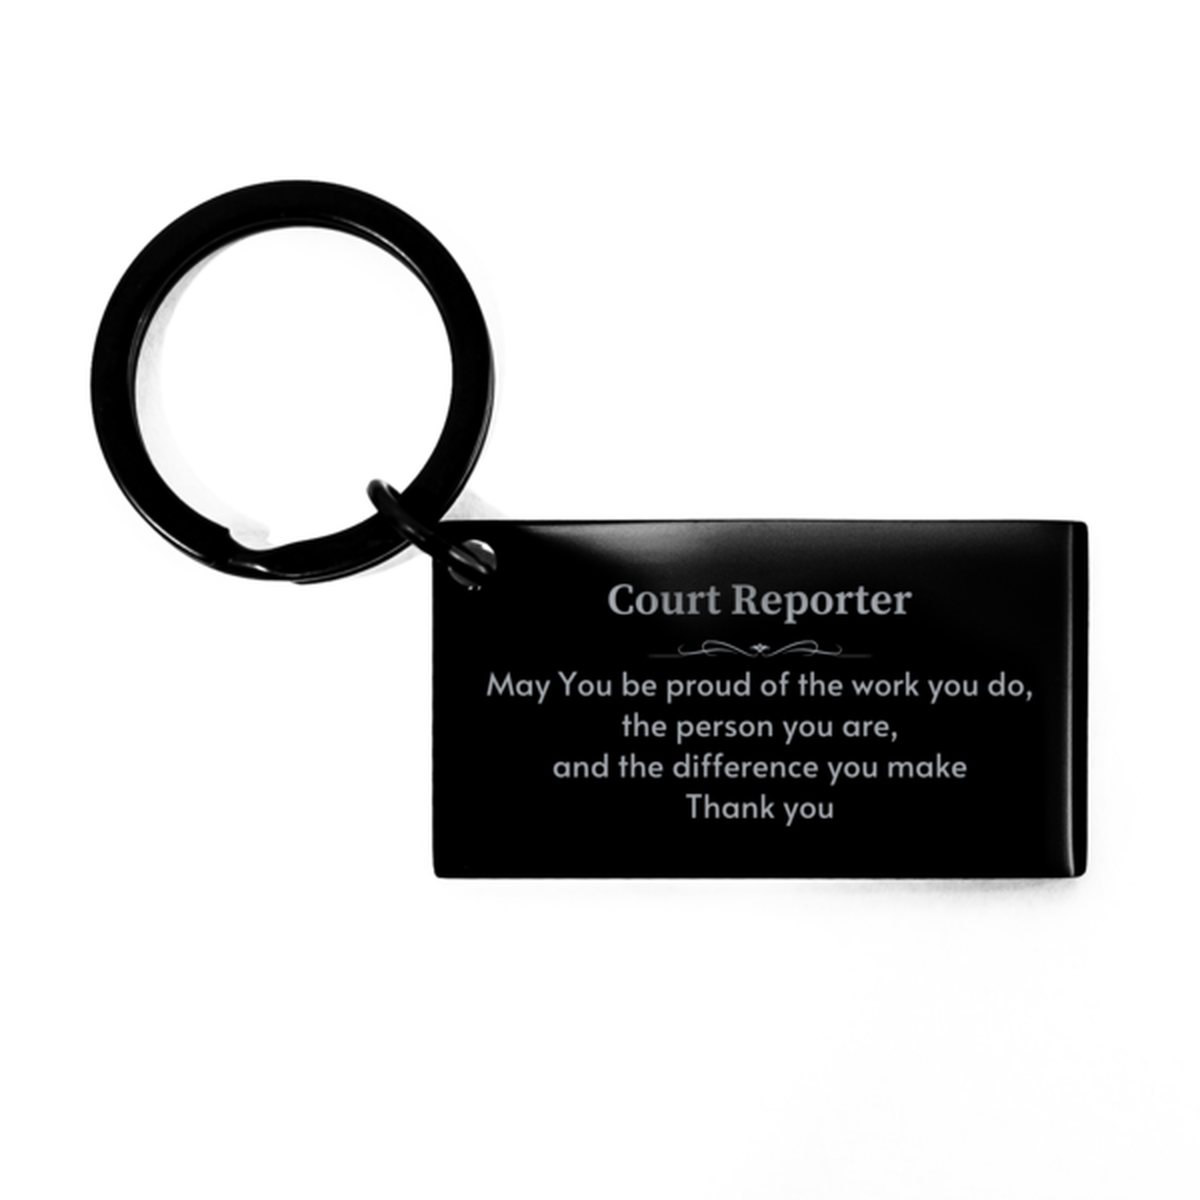 Heartwarming Keychain Retirement Coworkers Gifts for Court Reporter, Firefighter May You be proud of the work you do, the person you are Gifts for Boss Men Women Friends